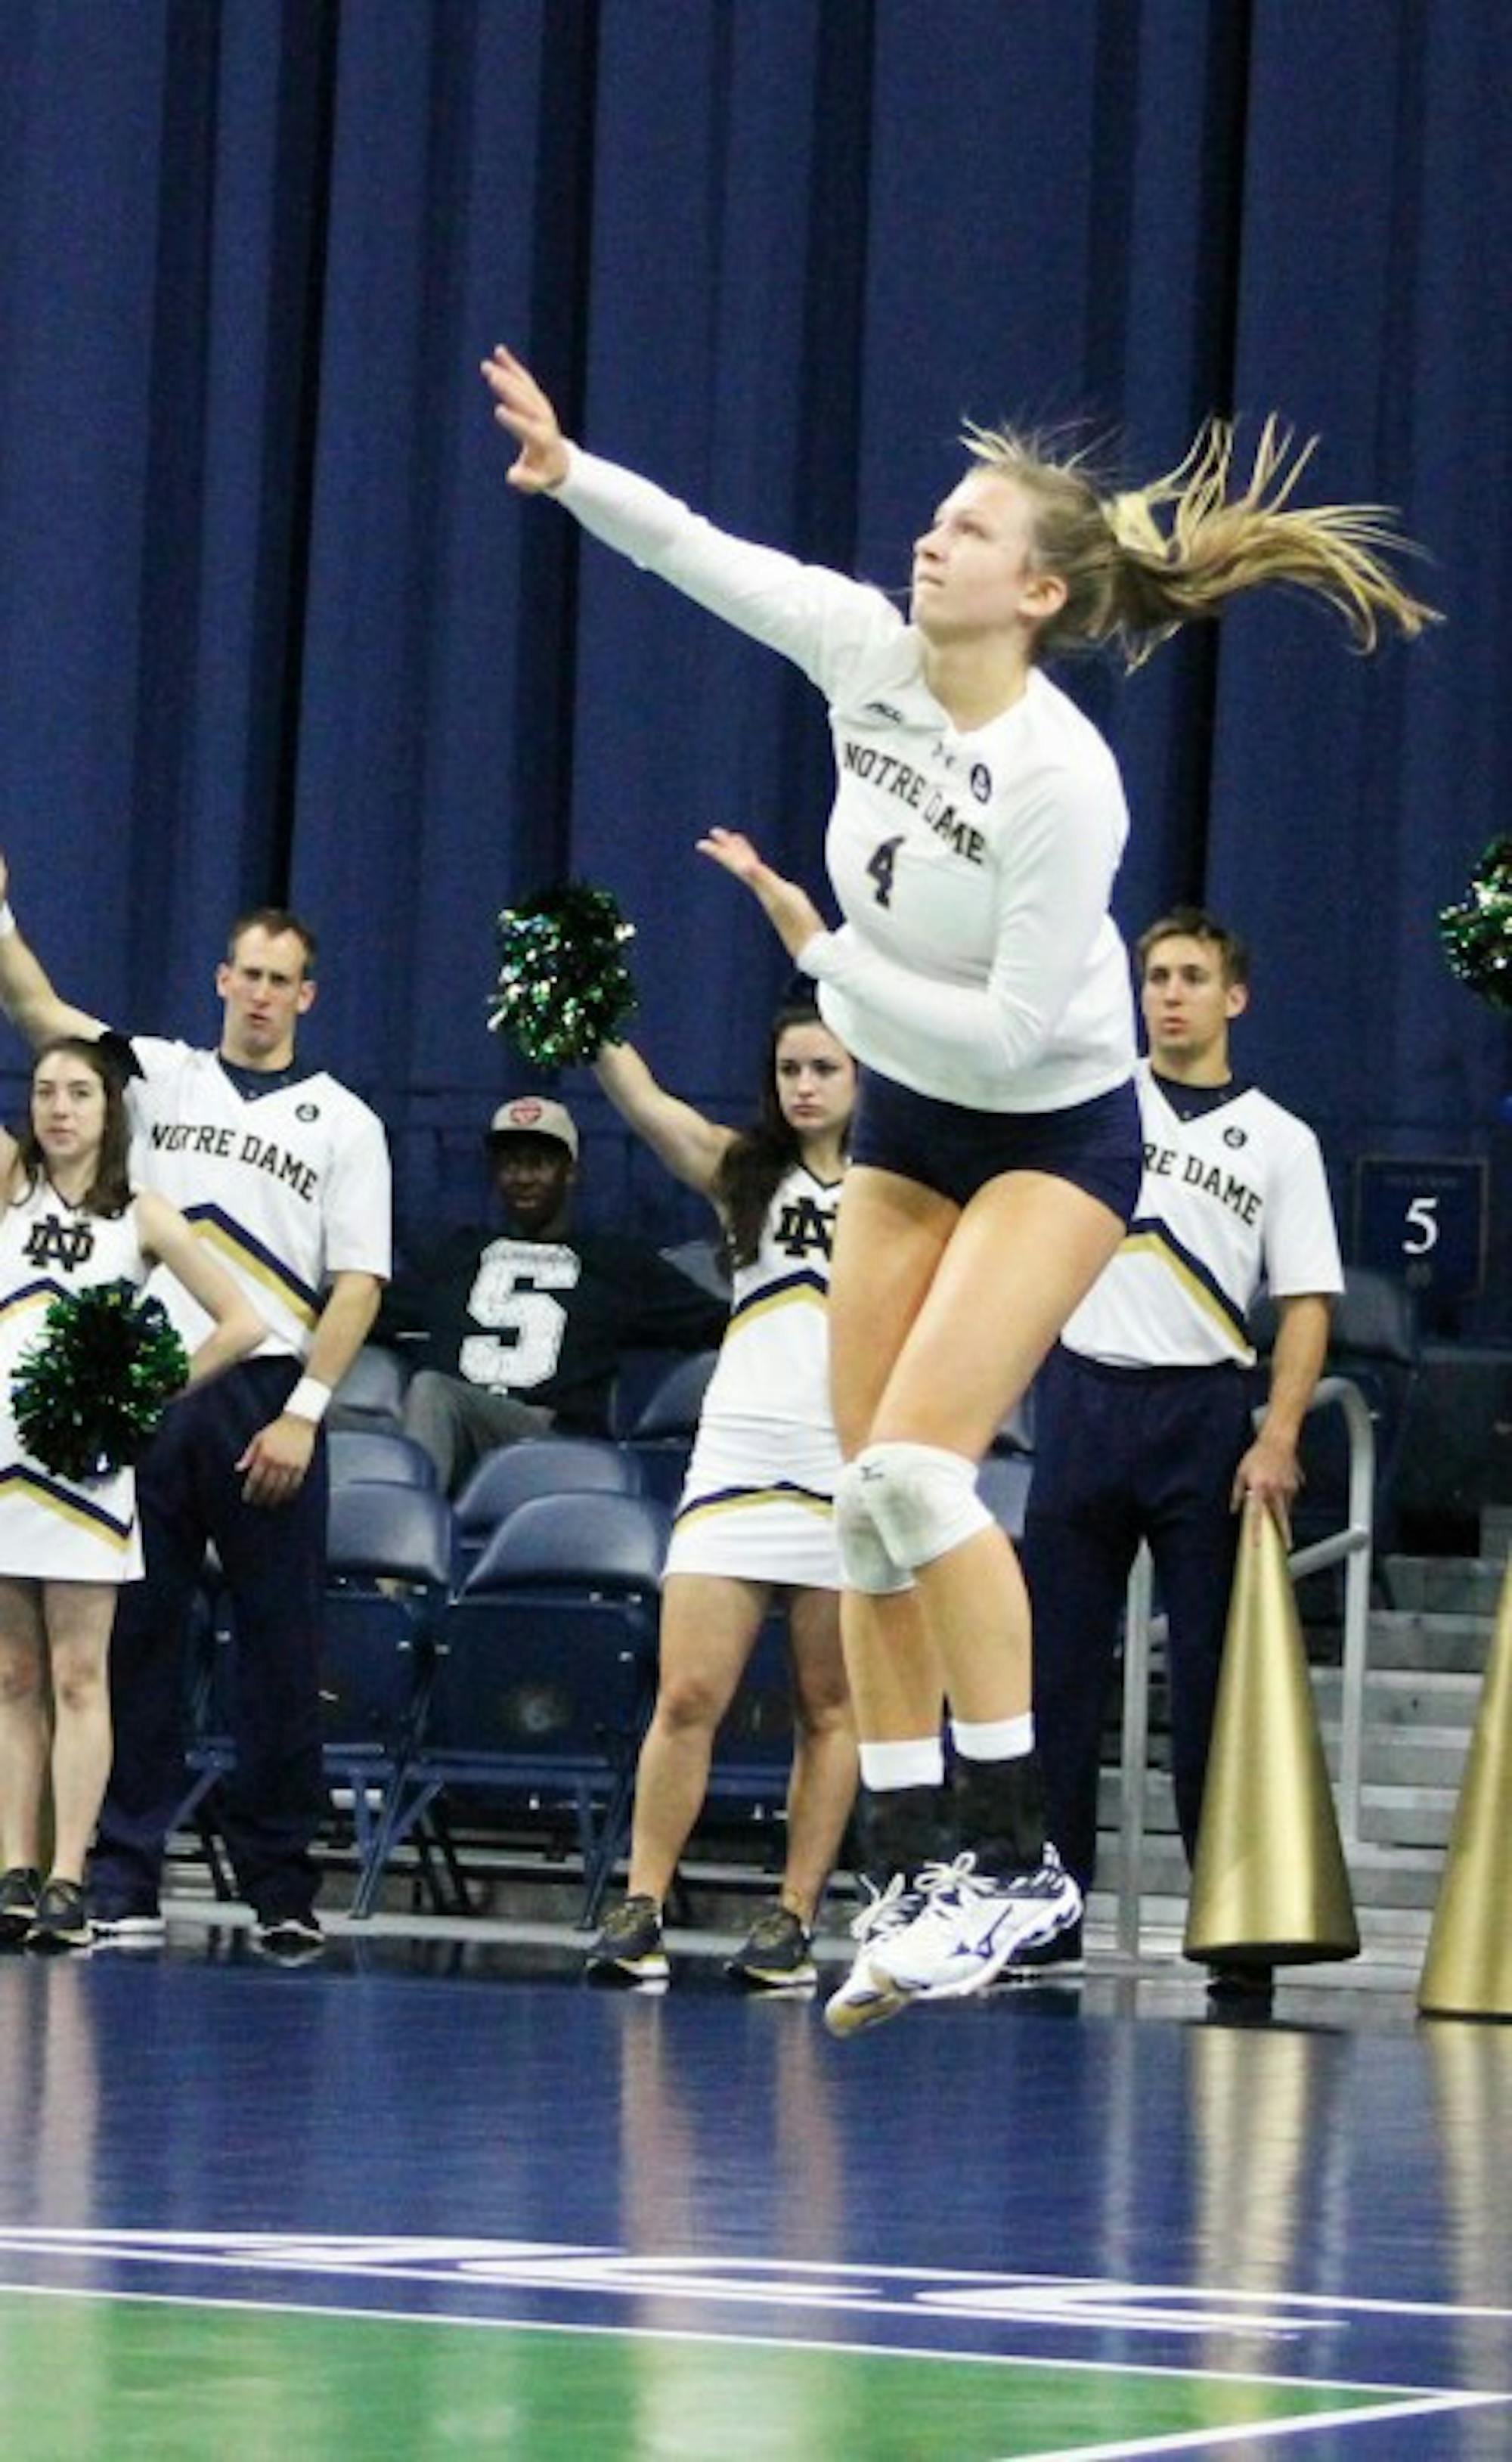 Irish freshman libero Ryann DeJarld serves to start a rally during Notre Dame’s 3-2 loss to Syracuse on Oct. 4 at Purcell Pavilion. DeJarld had a match-high 28 digs in the loss.